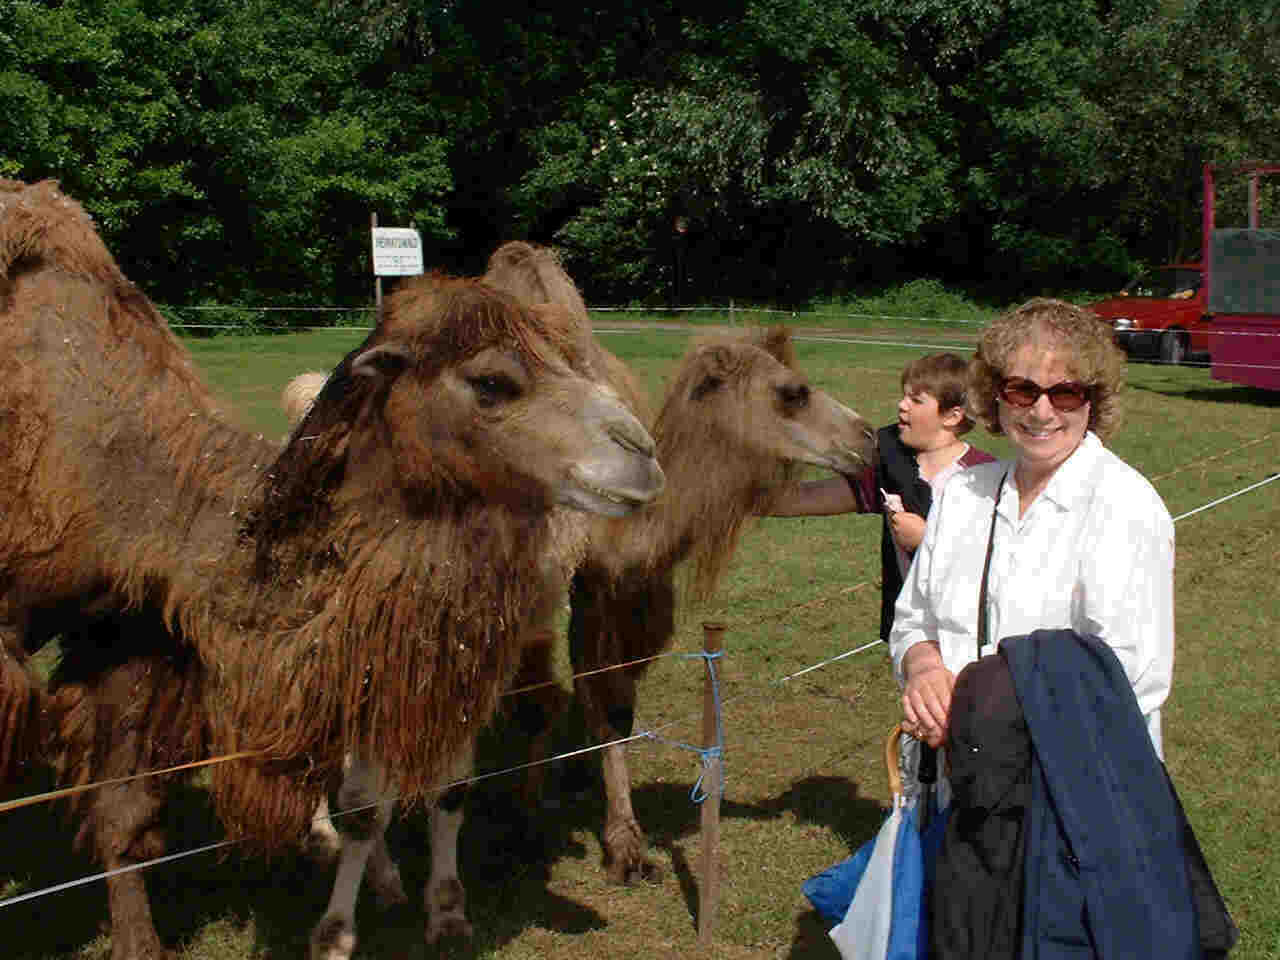 Margene and the camels